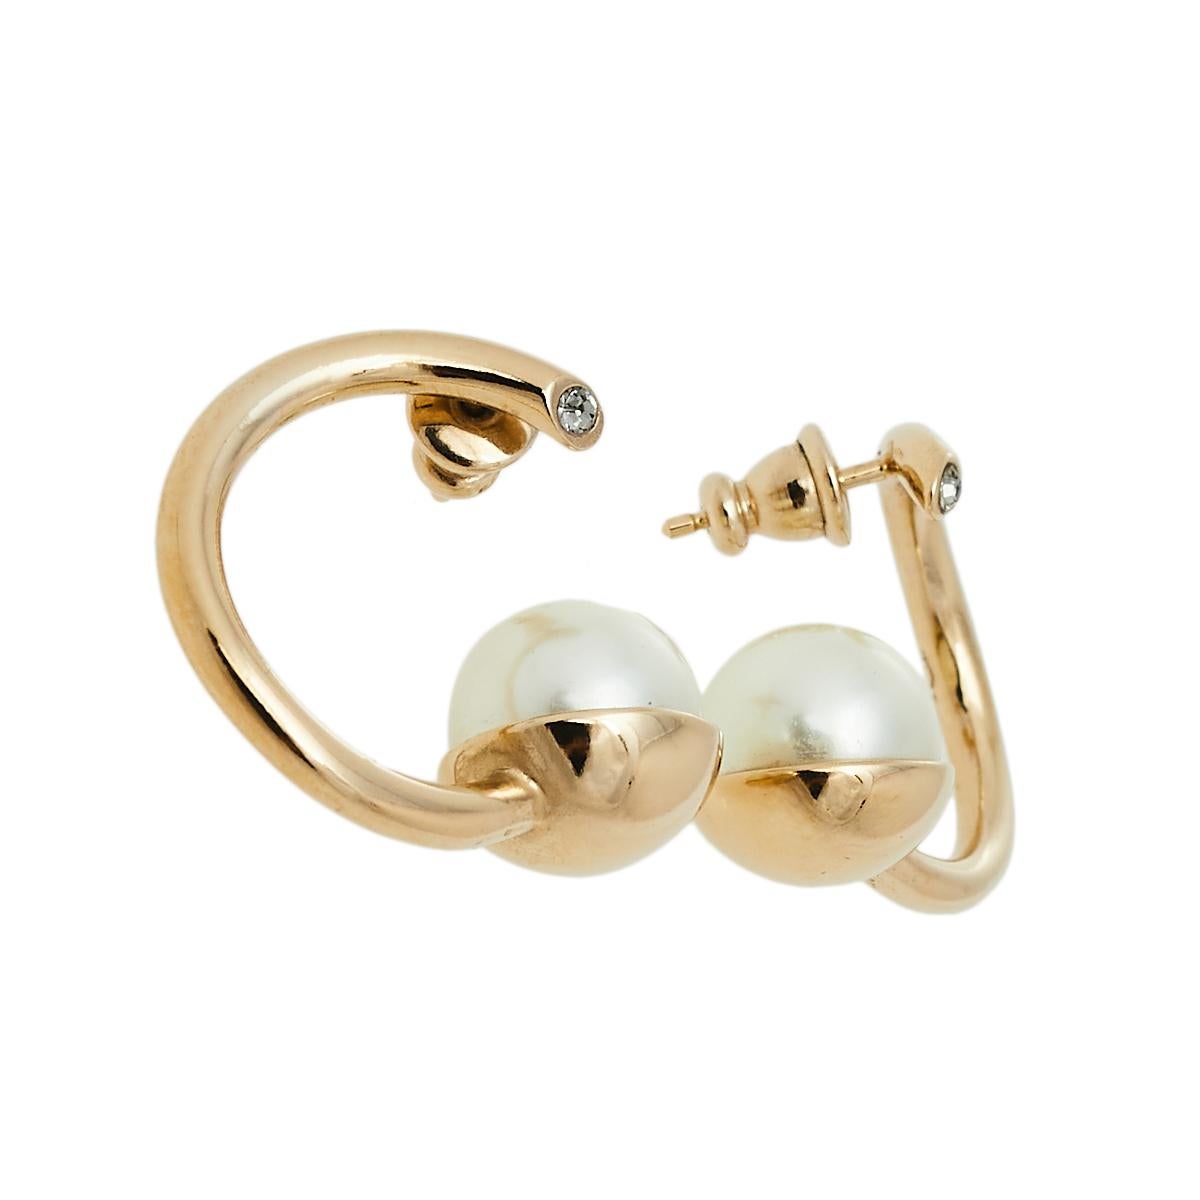 Enough to make a statement on its own, this pair of earrings from Dior has been made to delight all fashion lovers. They are made from gold-tone metal in a hoop style and detailed with faux pearls and petite crystals.

Includes: Original Box,